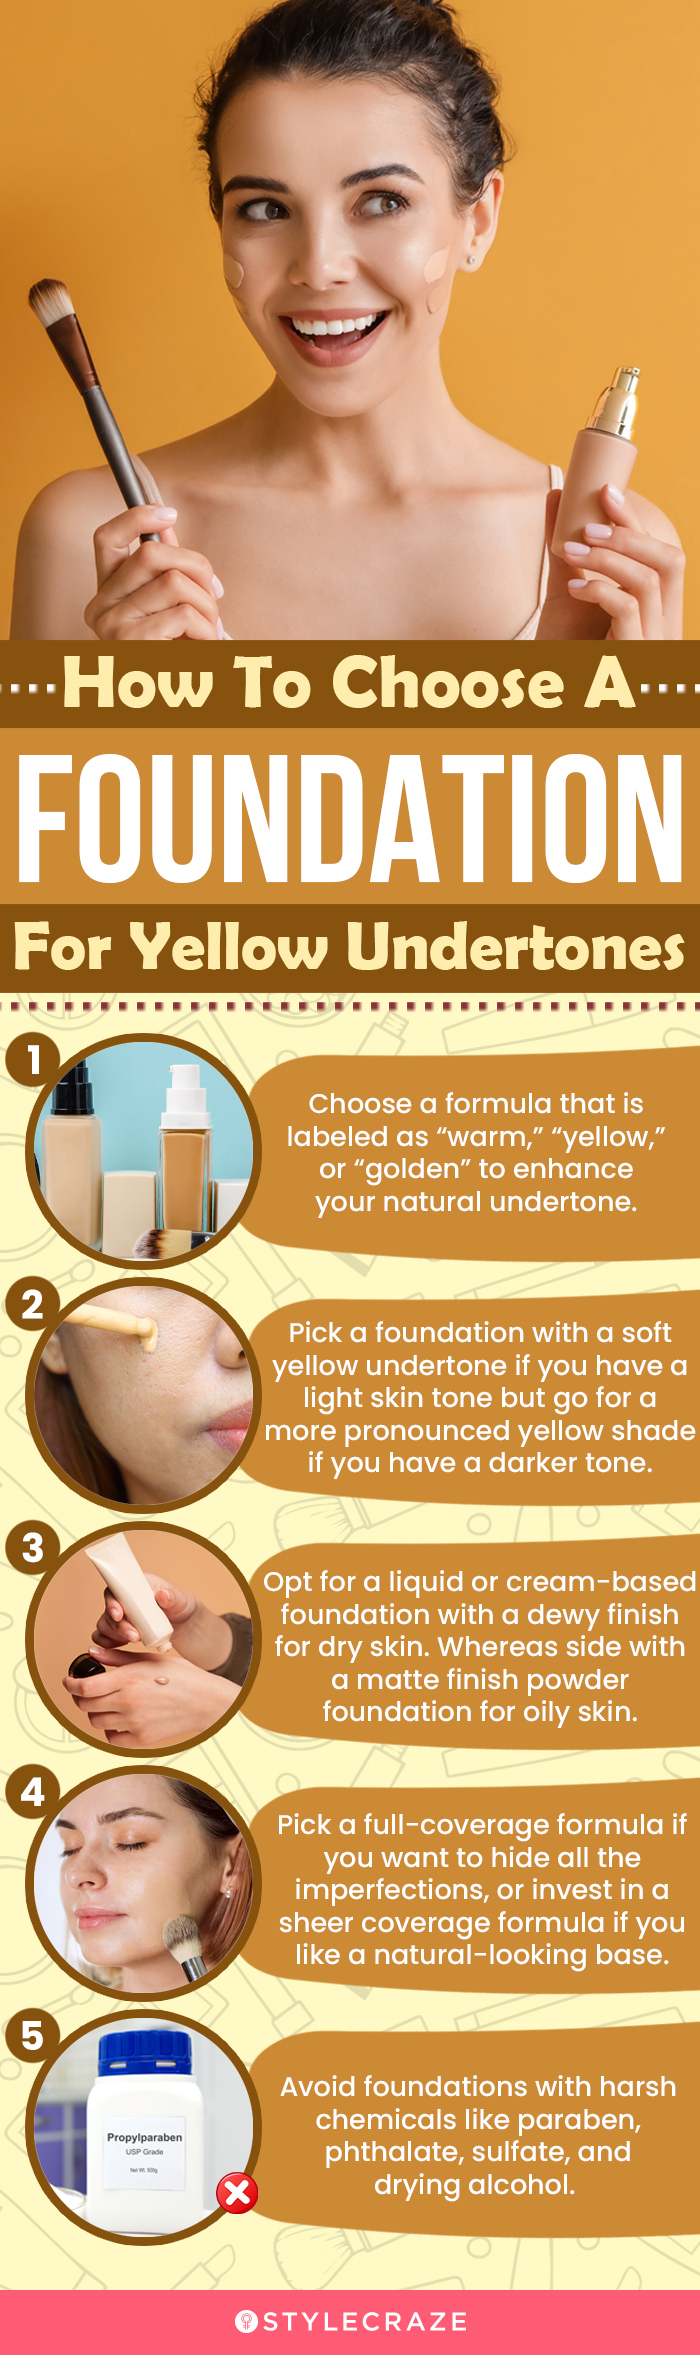 How To Choose A Foundation For Yellow Undertones (infographic)